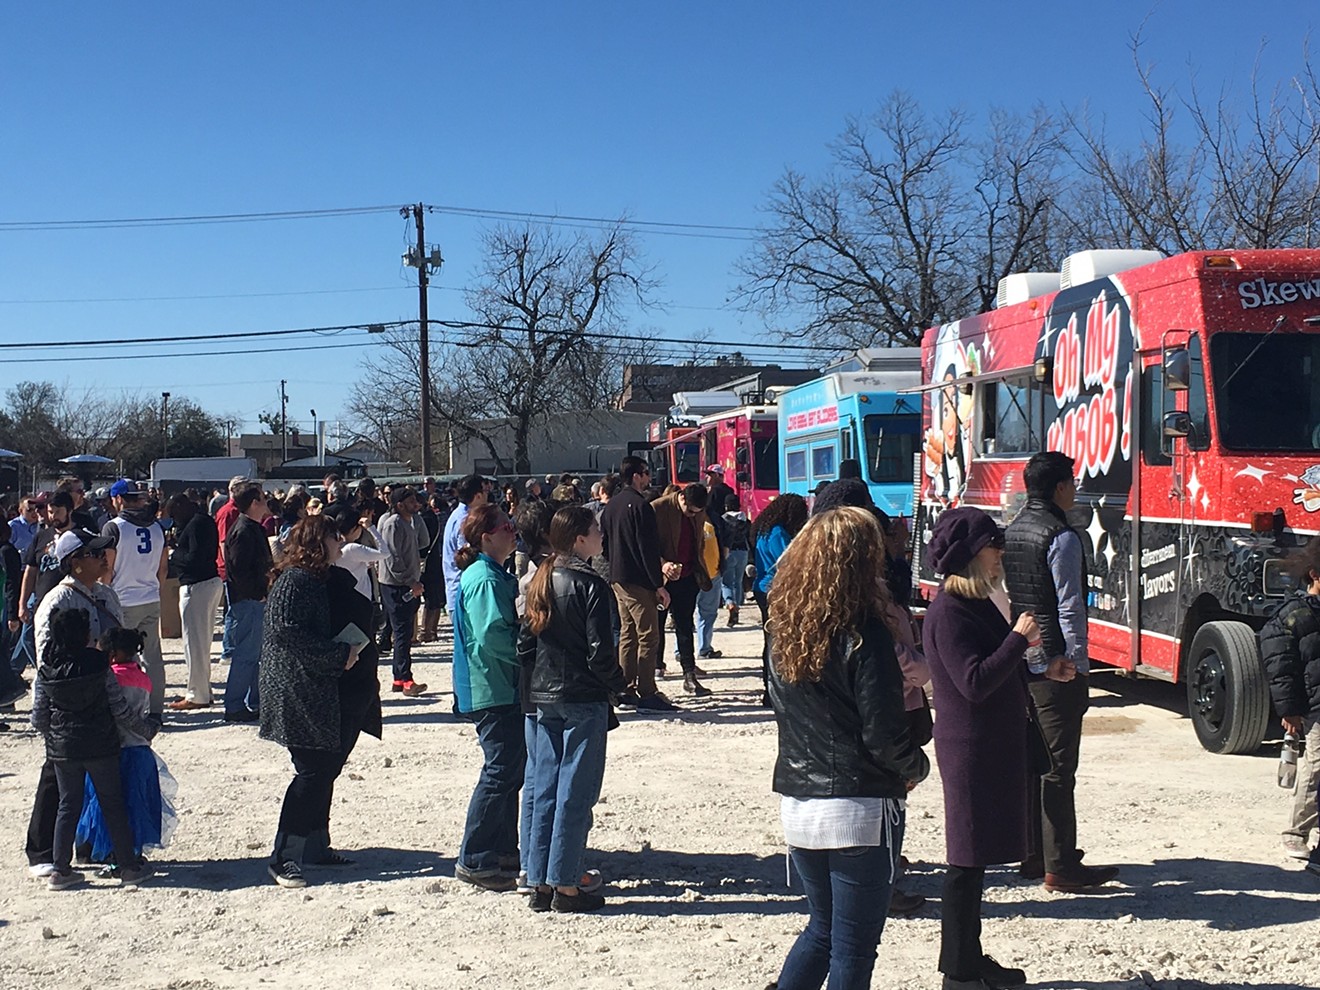 Saturday’s Food Truck Derby saw about a dozen food trucks gather in downtown Plano.